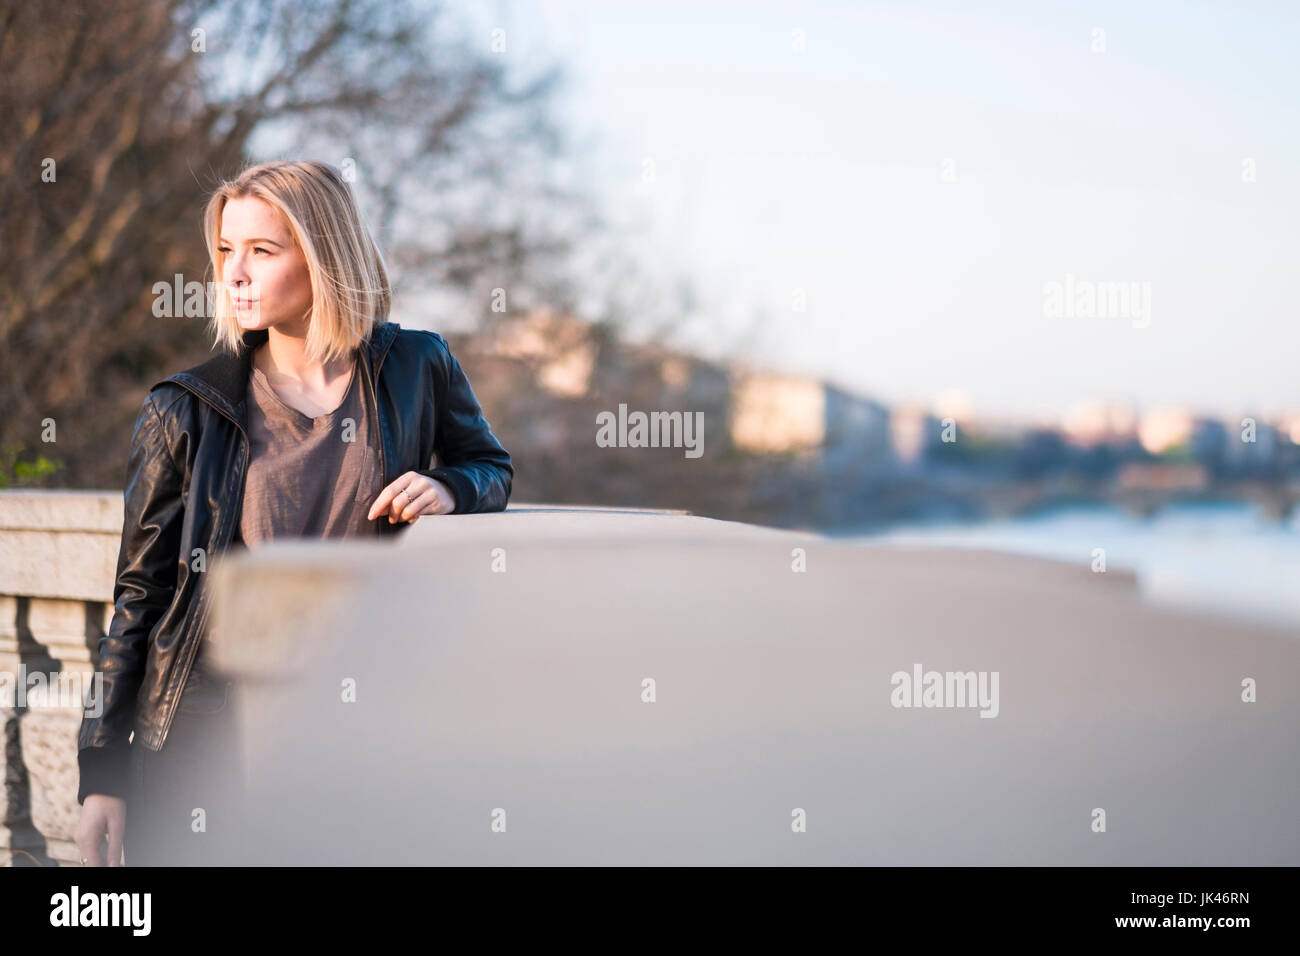 Caucasian woman leaning on wall near river Stock Photo